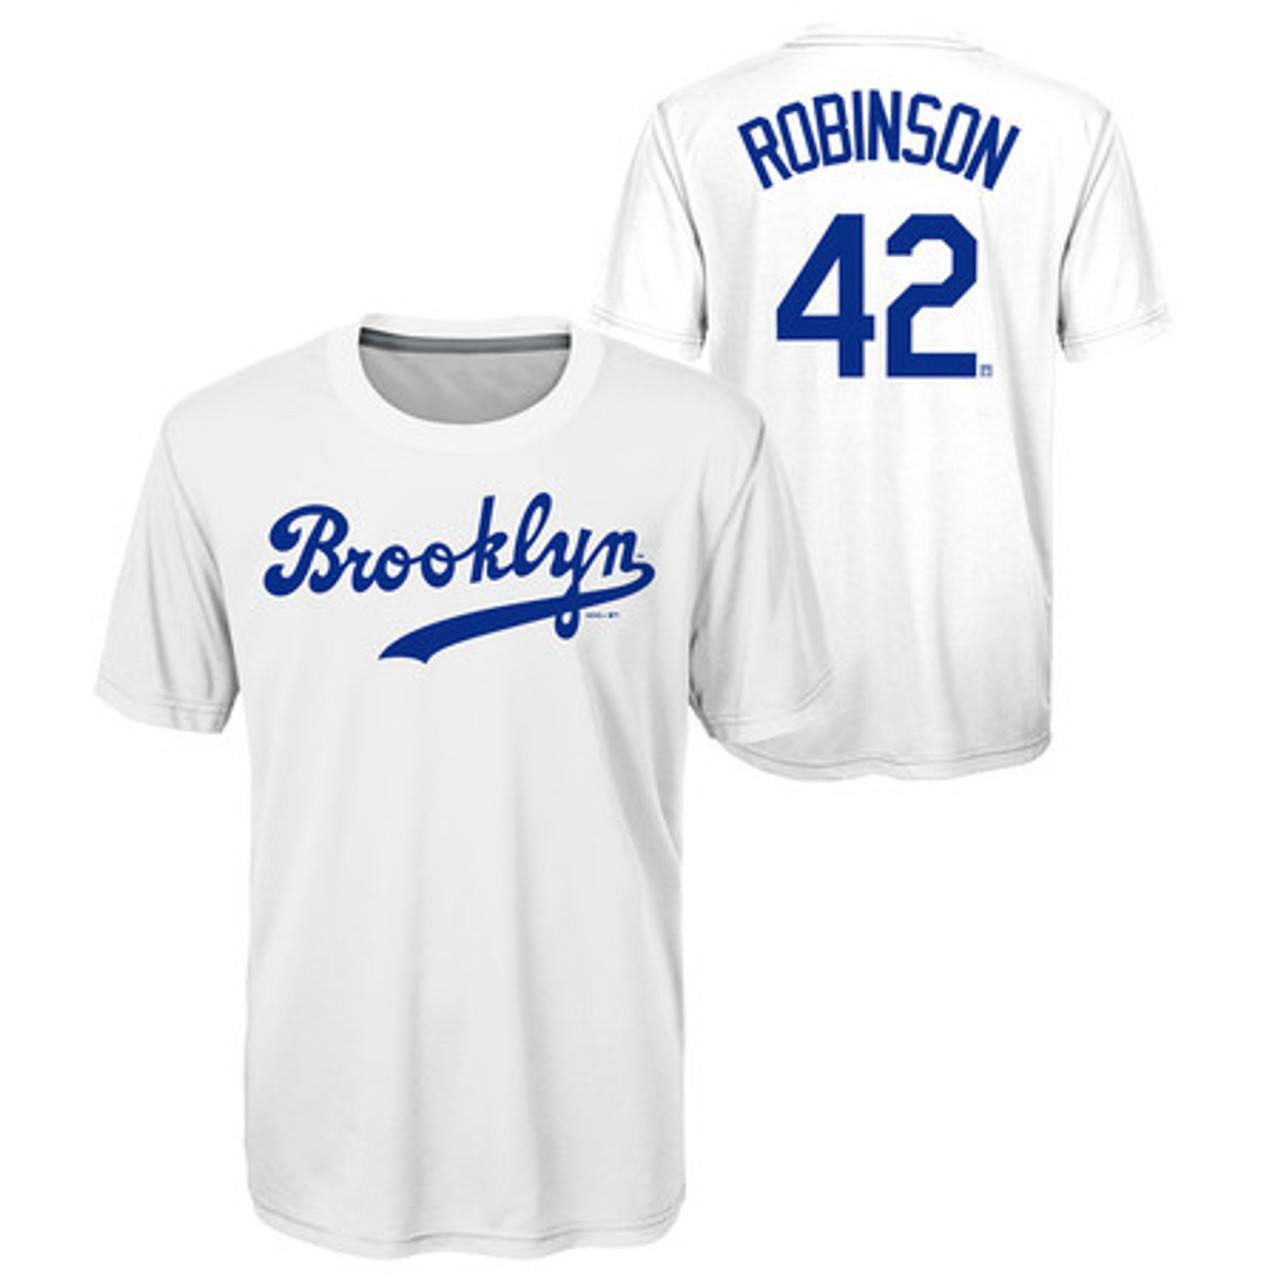 jackie robinson jersey cooperstown collection